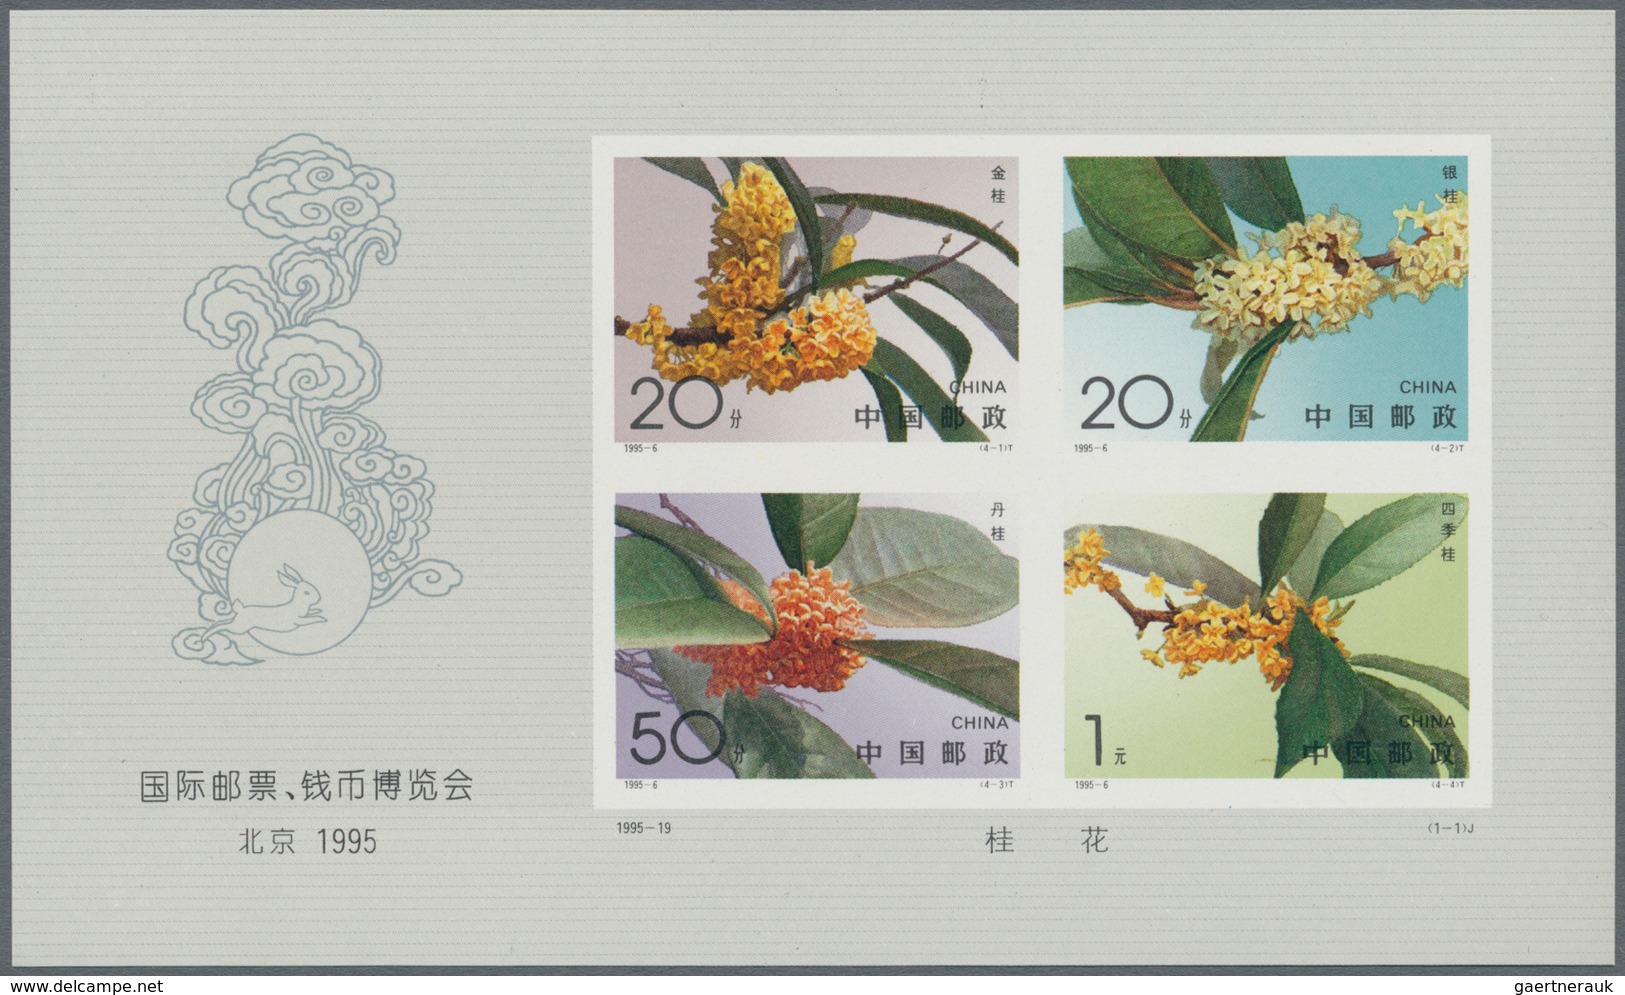 China - Volksrepublik: 1995, stamp and coin exhibition s/s, imperforated (4), mint never hinged MNH;